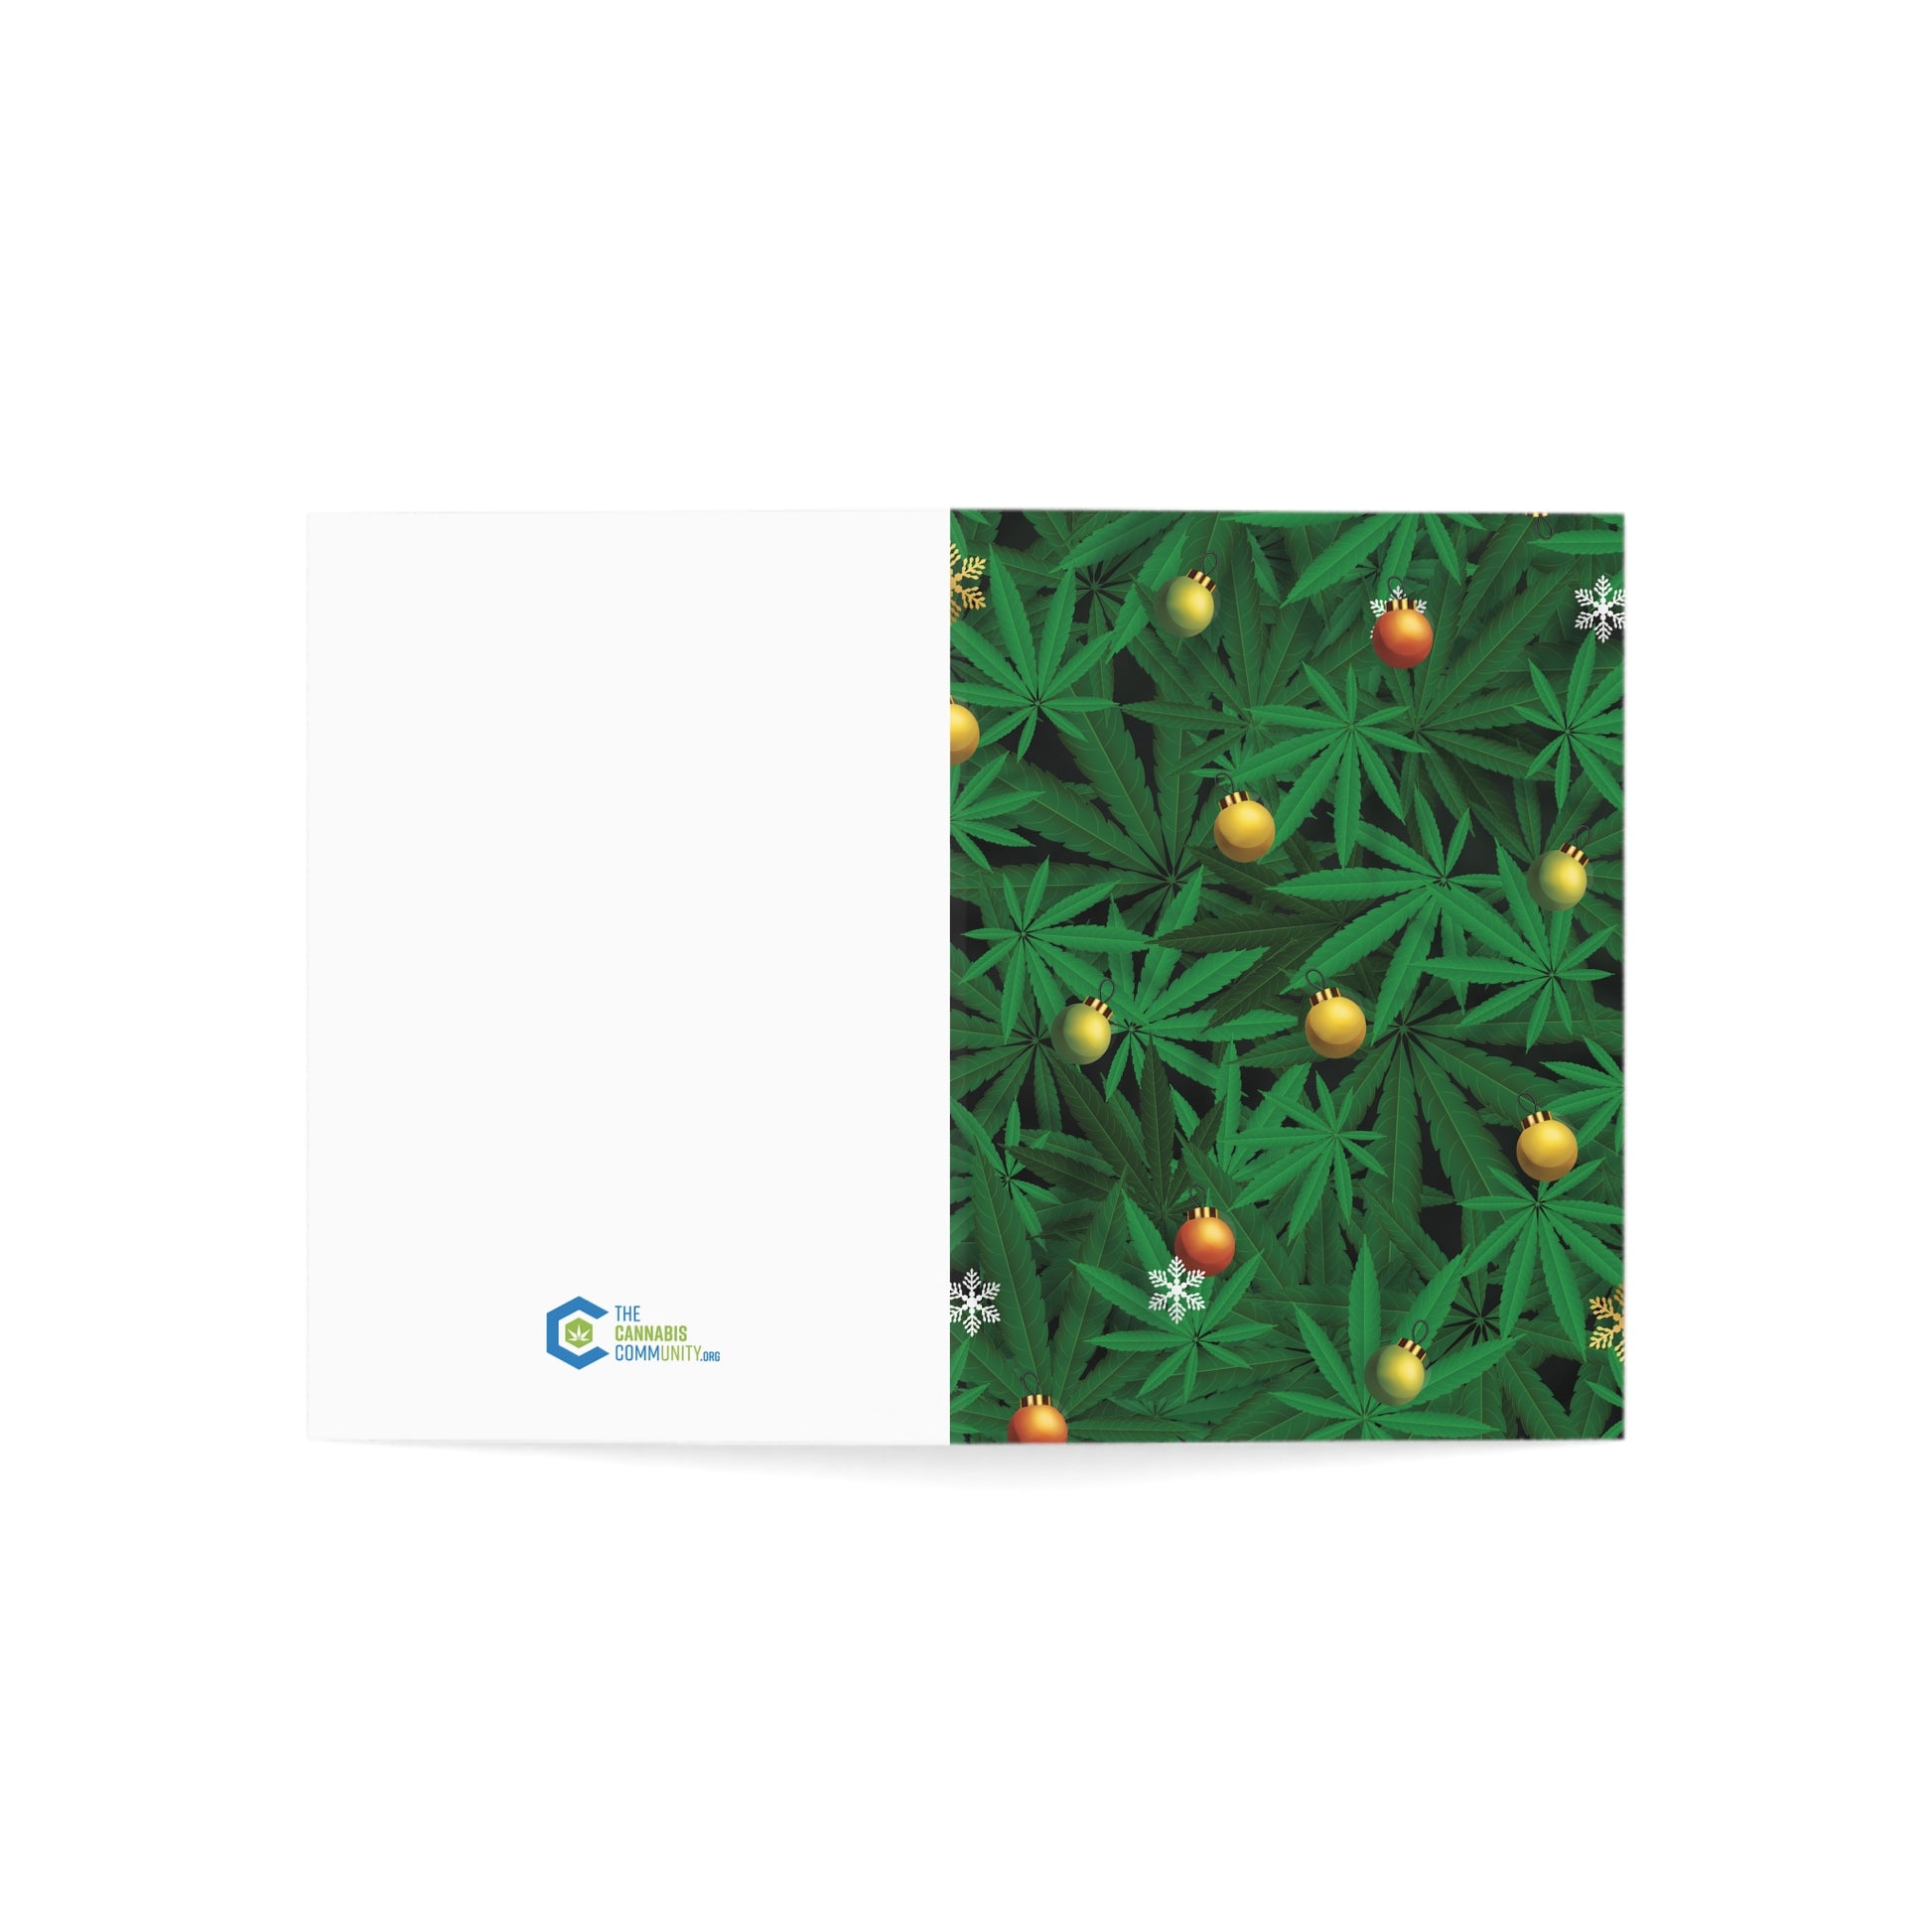 Open greeting card mockup with a festive cannabis leaf design on one side and a clean white space on the other, featuring the logo of The Cannabis Community at the bottom left.